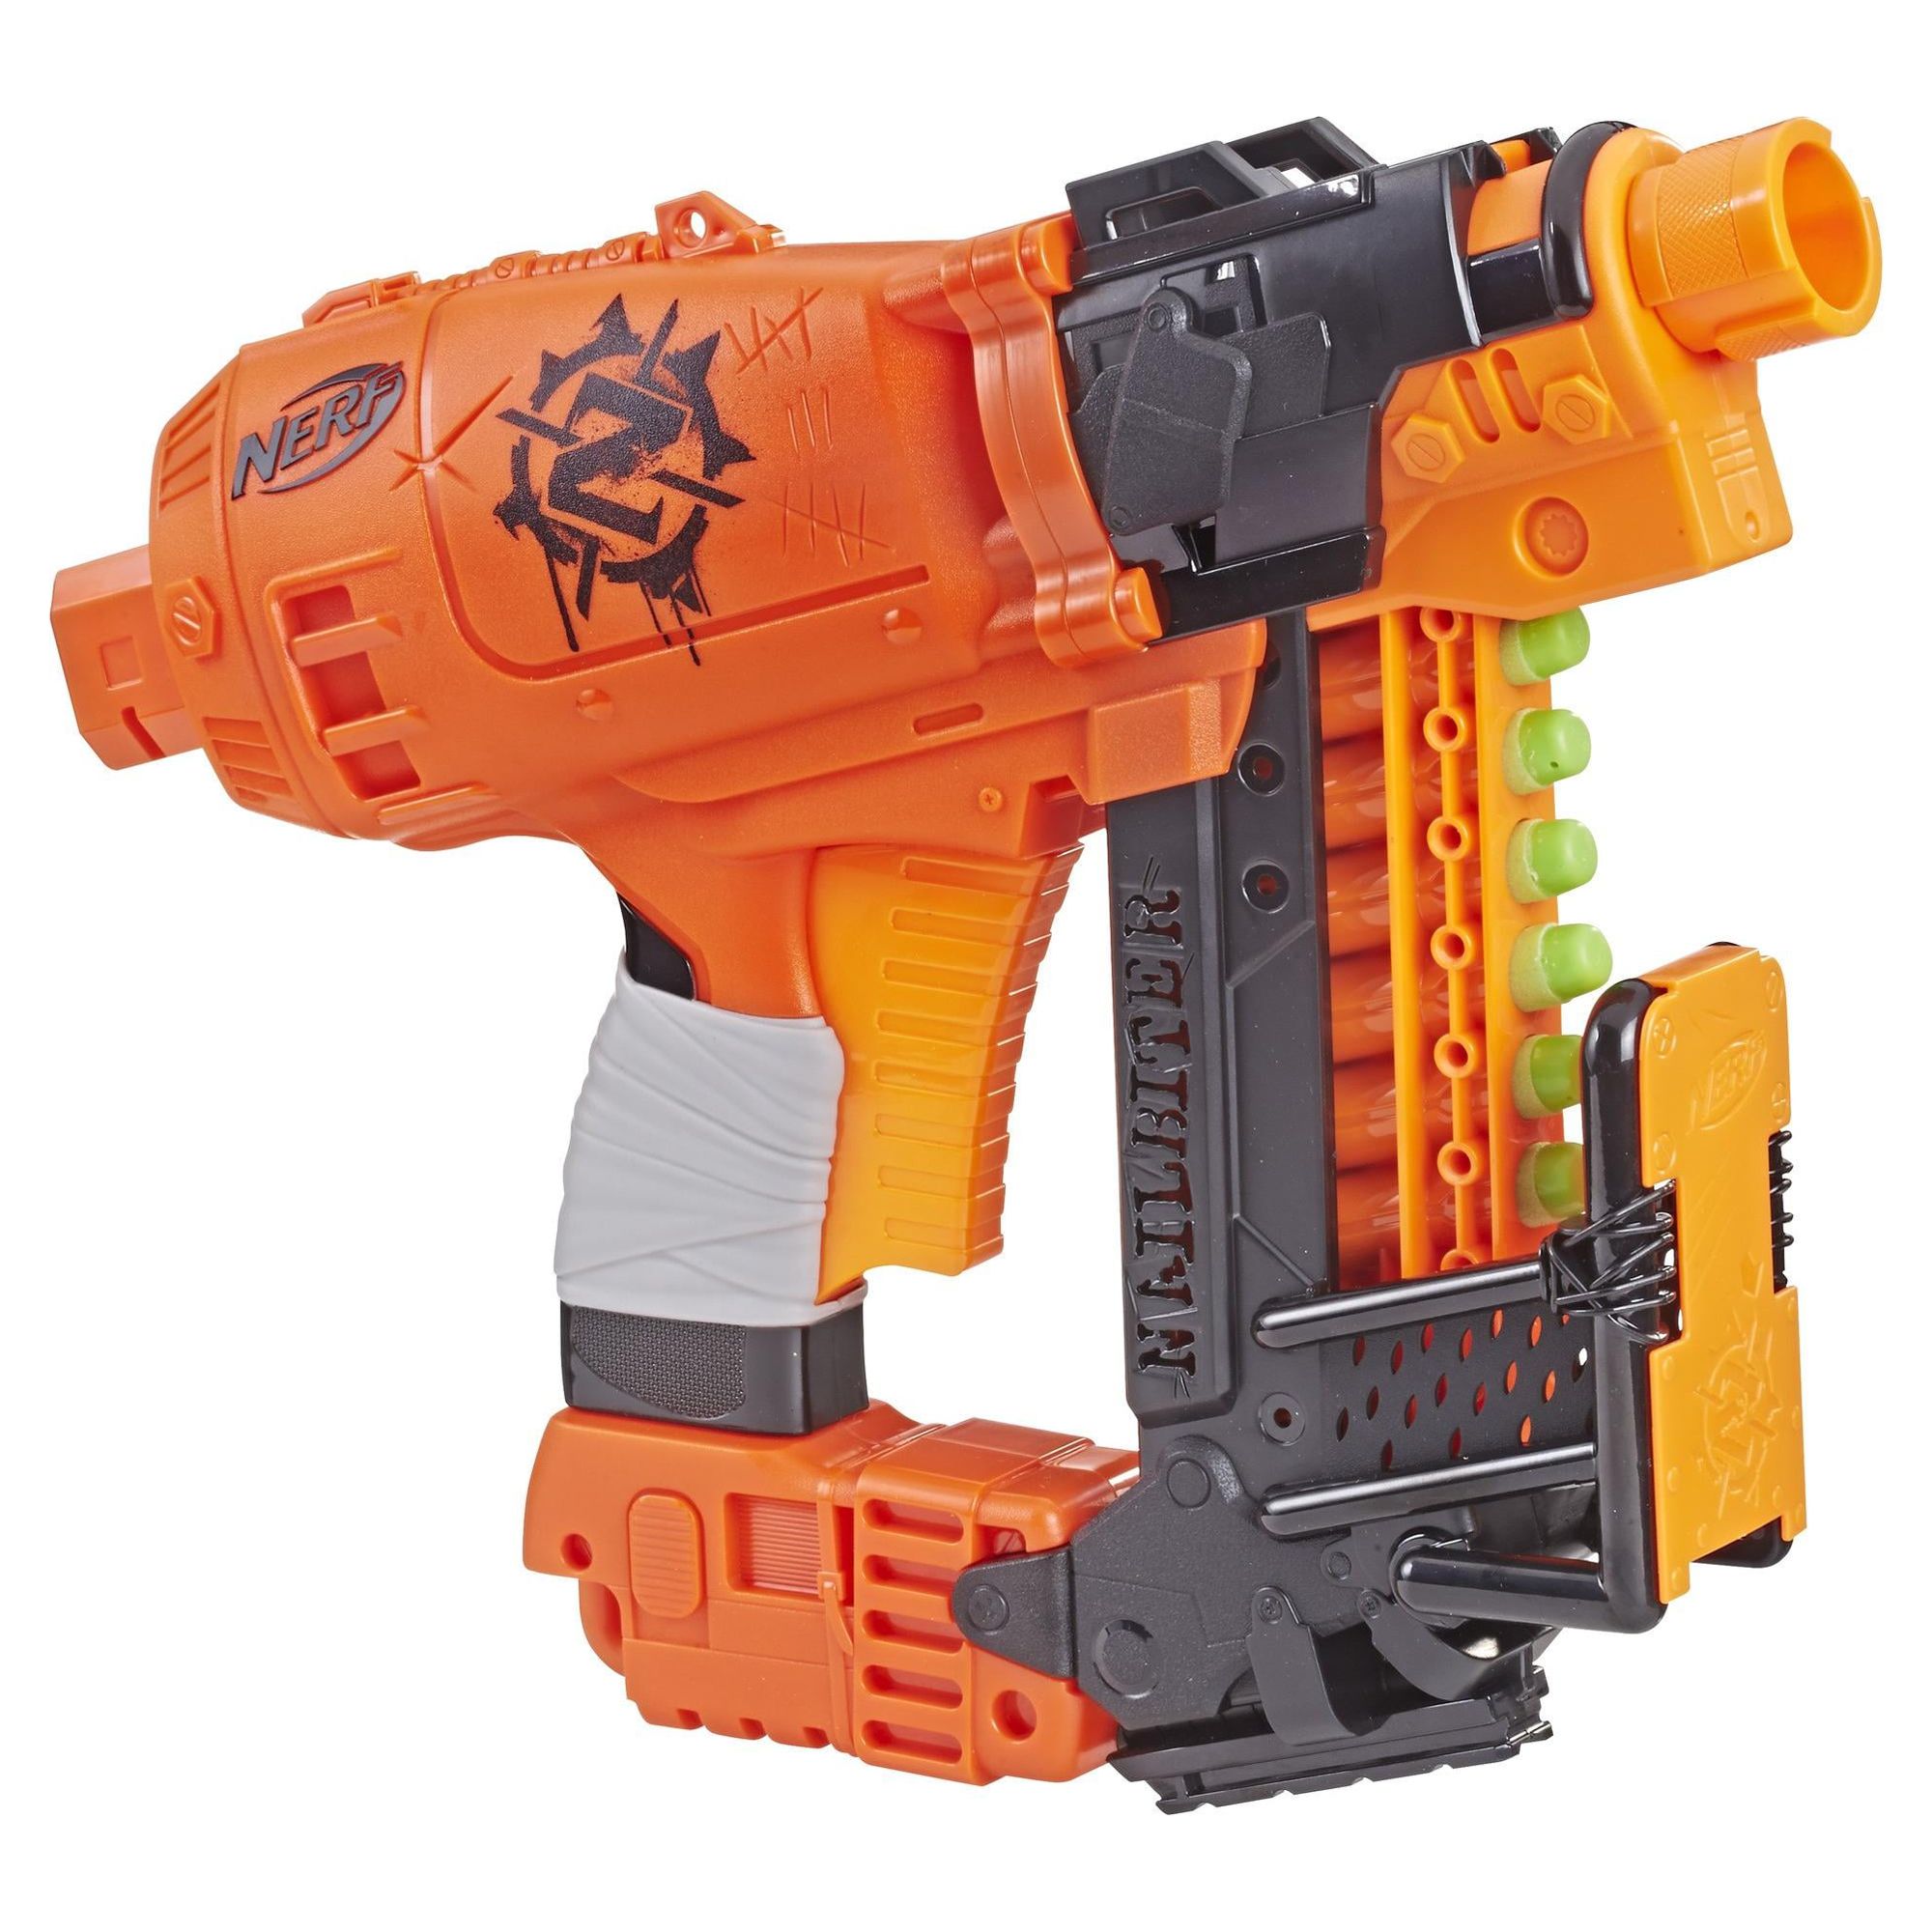 Nerf Zombie Survival Nailbiter Kids Toy Blaster with 8 Darts - image 1 of 9